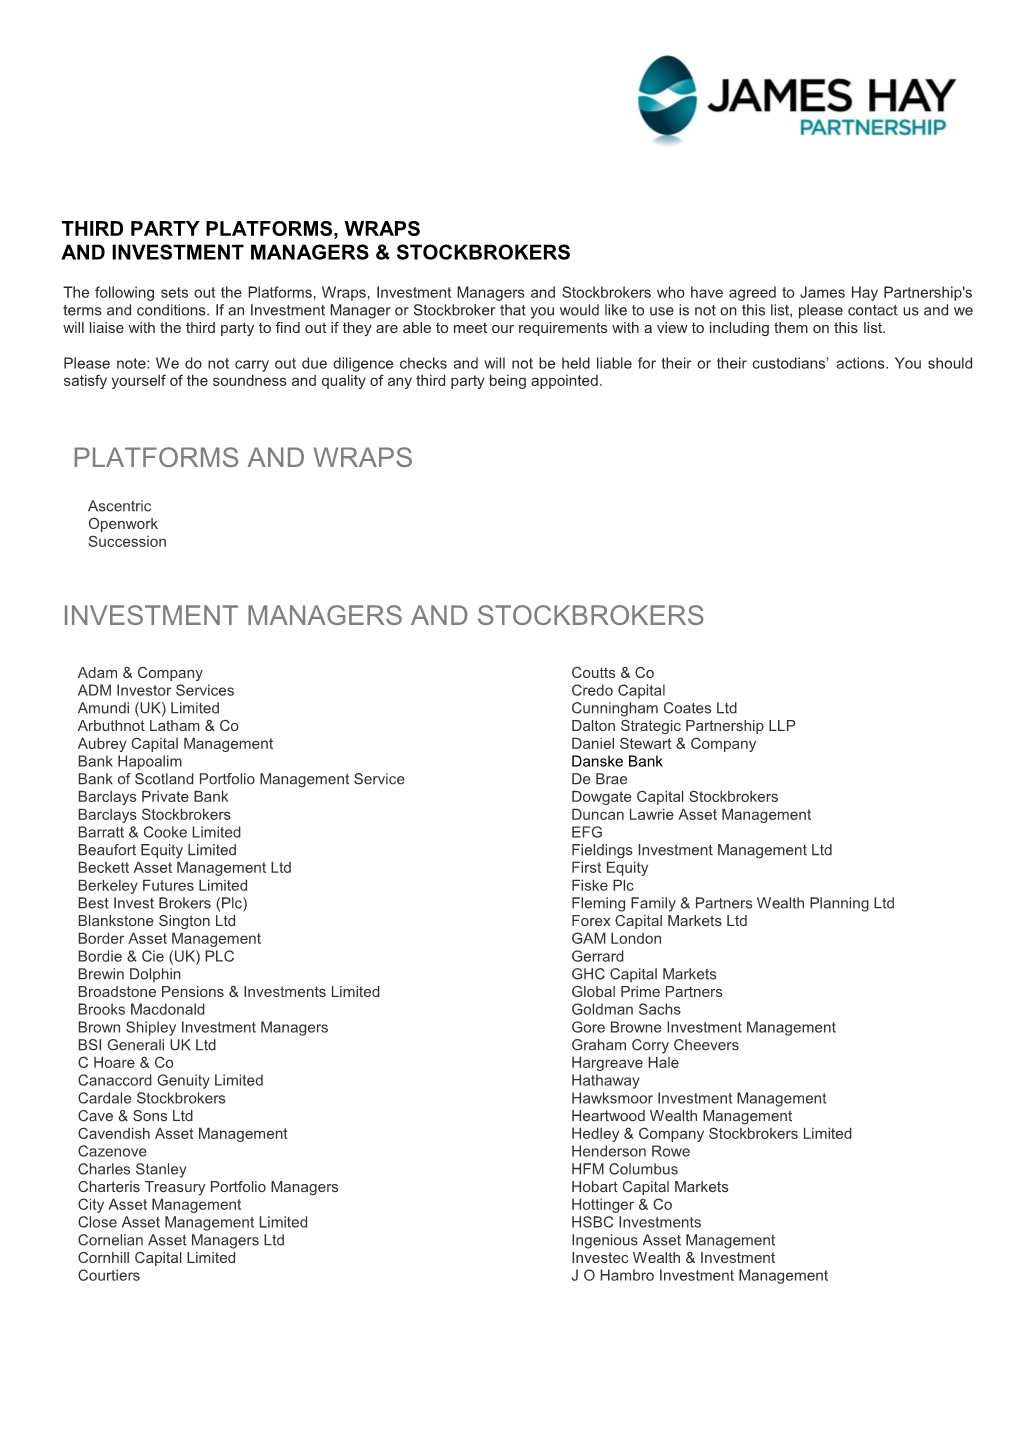 Third Party Platforms, Wraps and Investment Managers & Stockbrokers